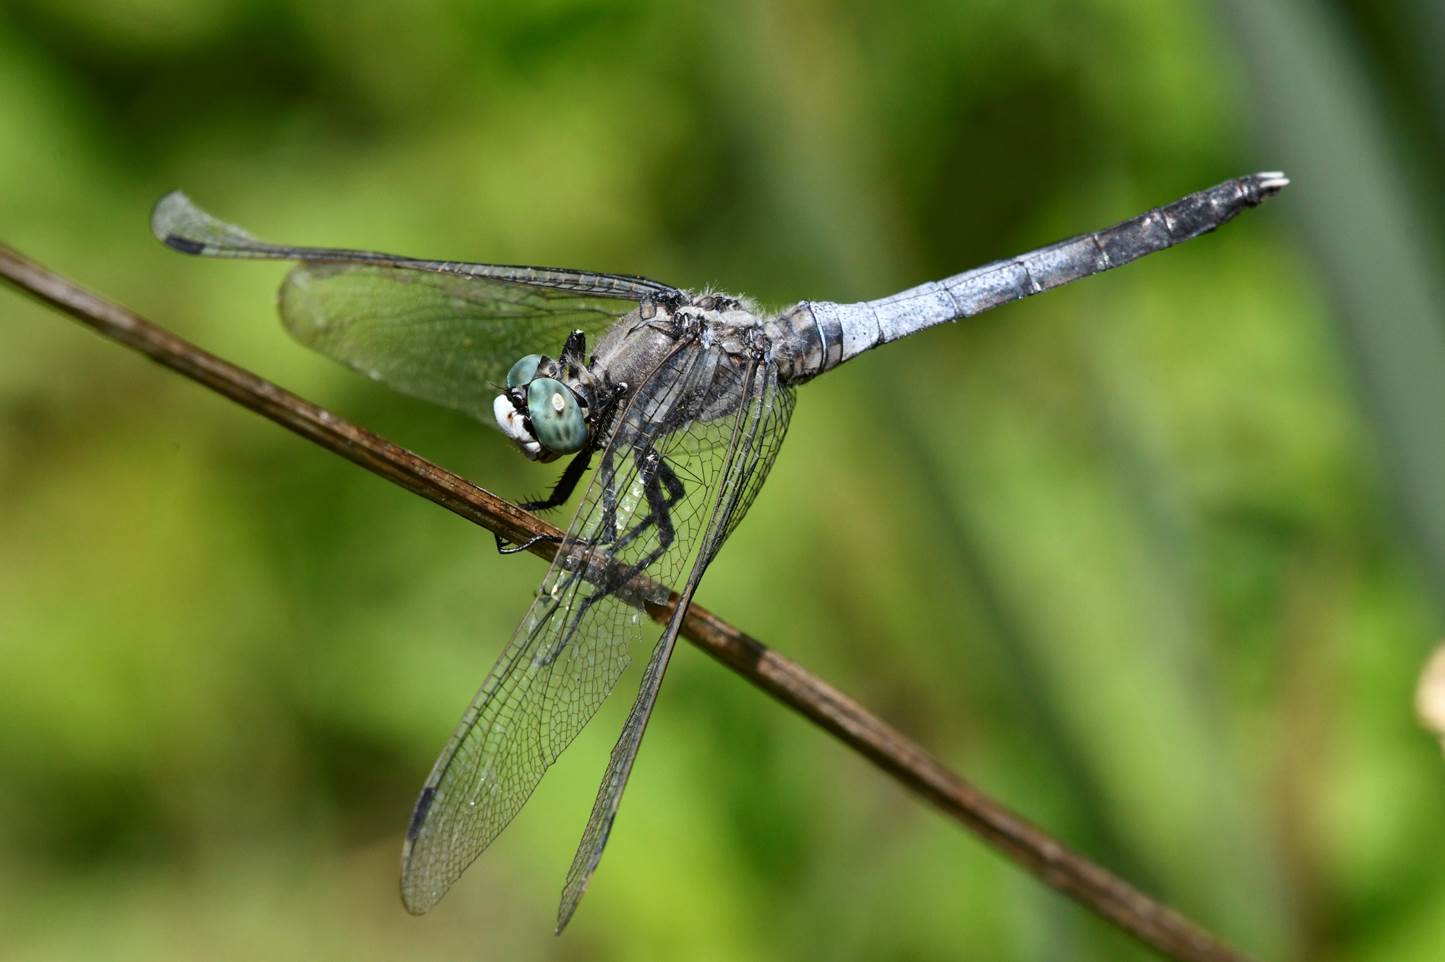 A dragonfly on a branch

Description automatically generated